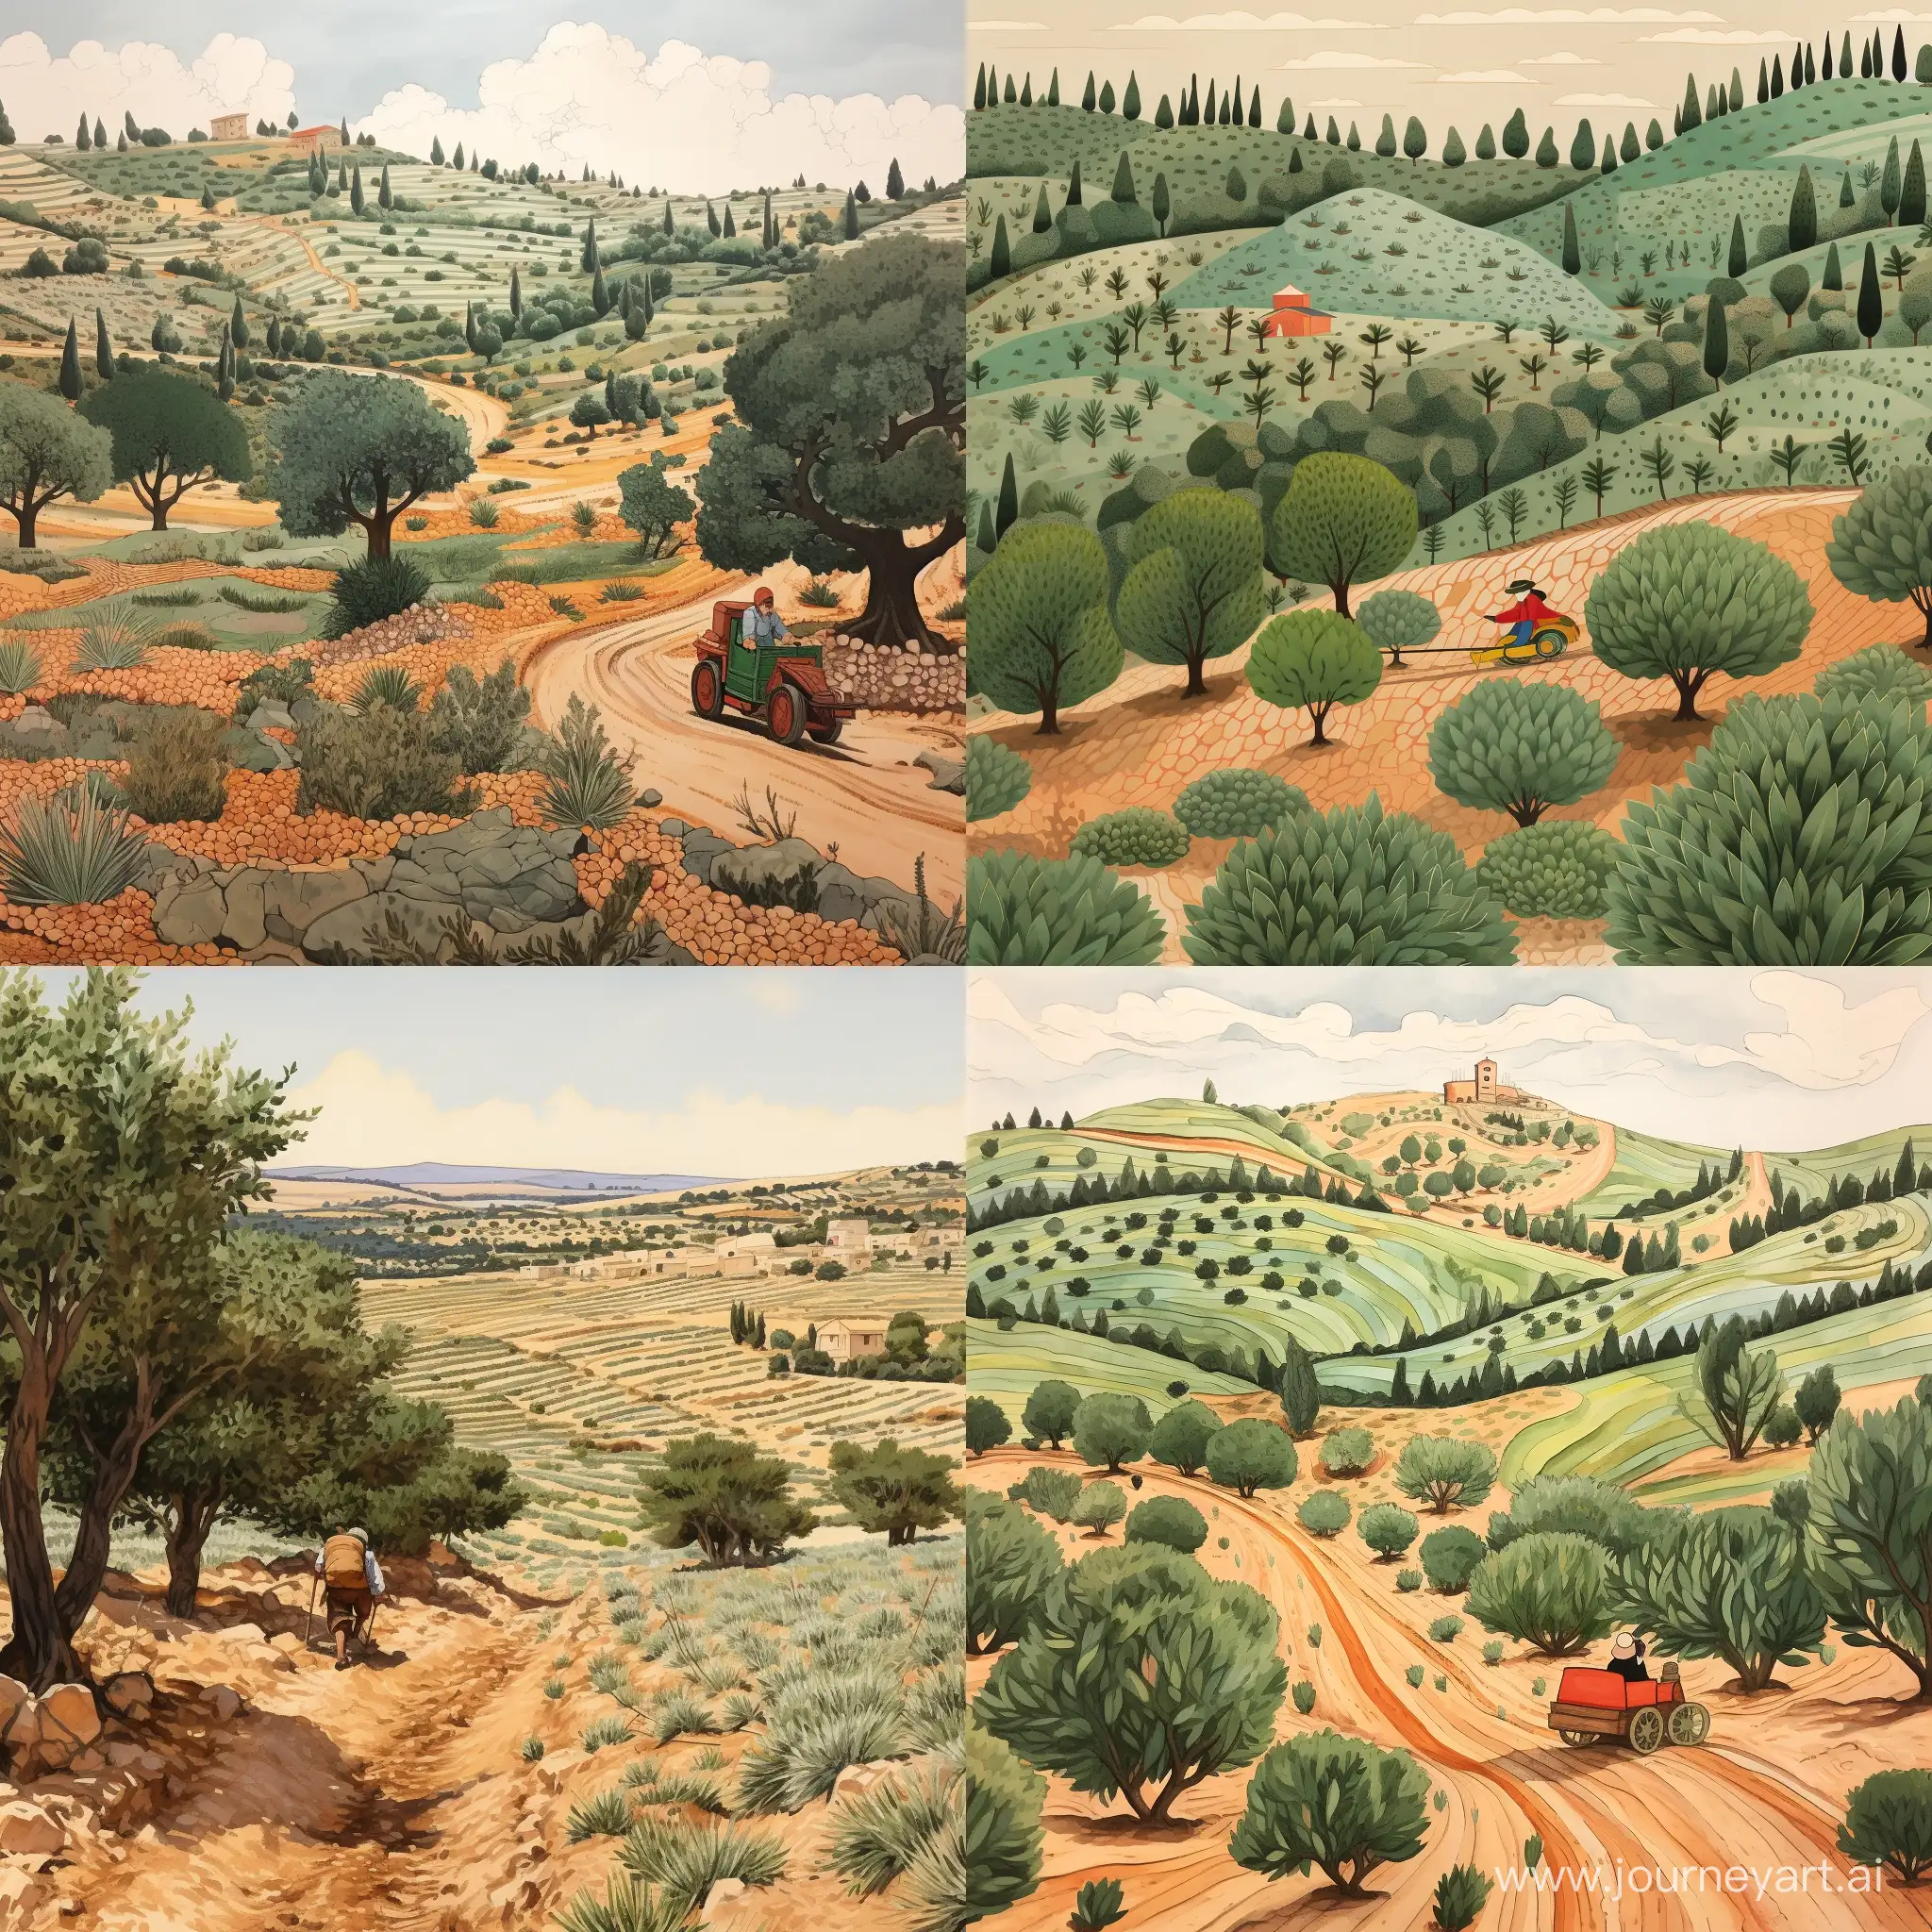 Palestinian-Farmer-Plowing-Olive-Grove-with-Prickly-Pear-and-Pine-Trees